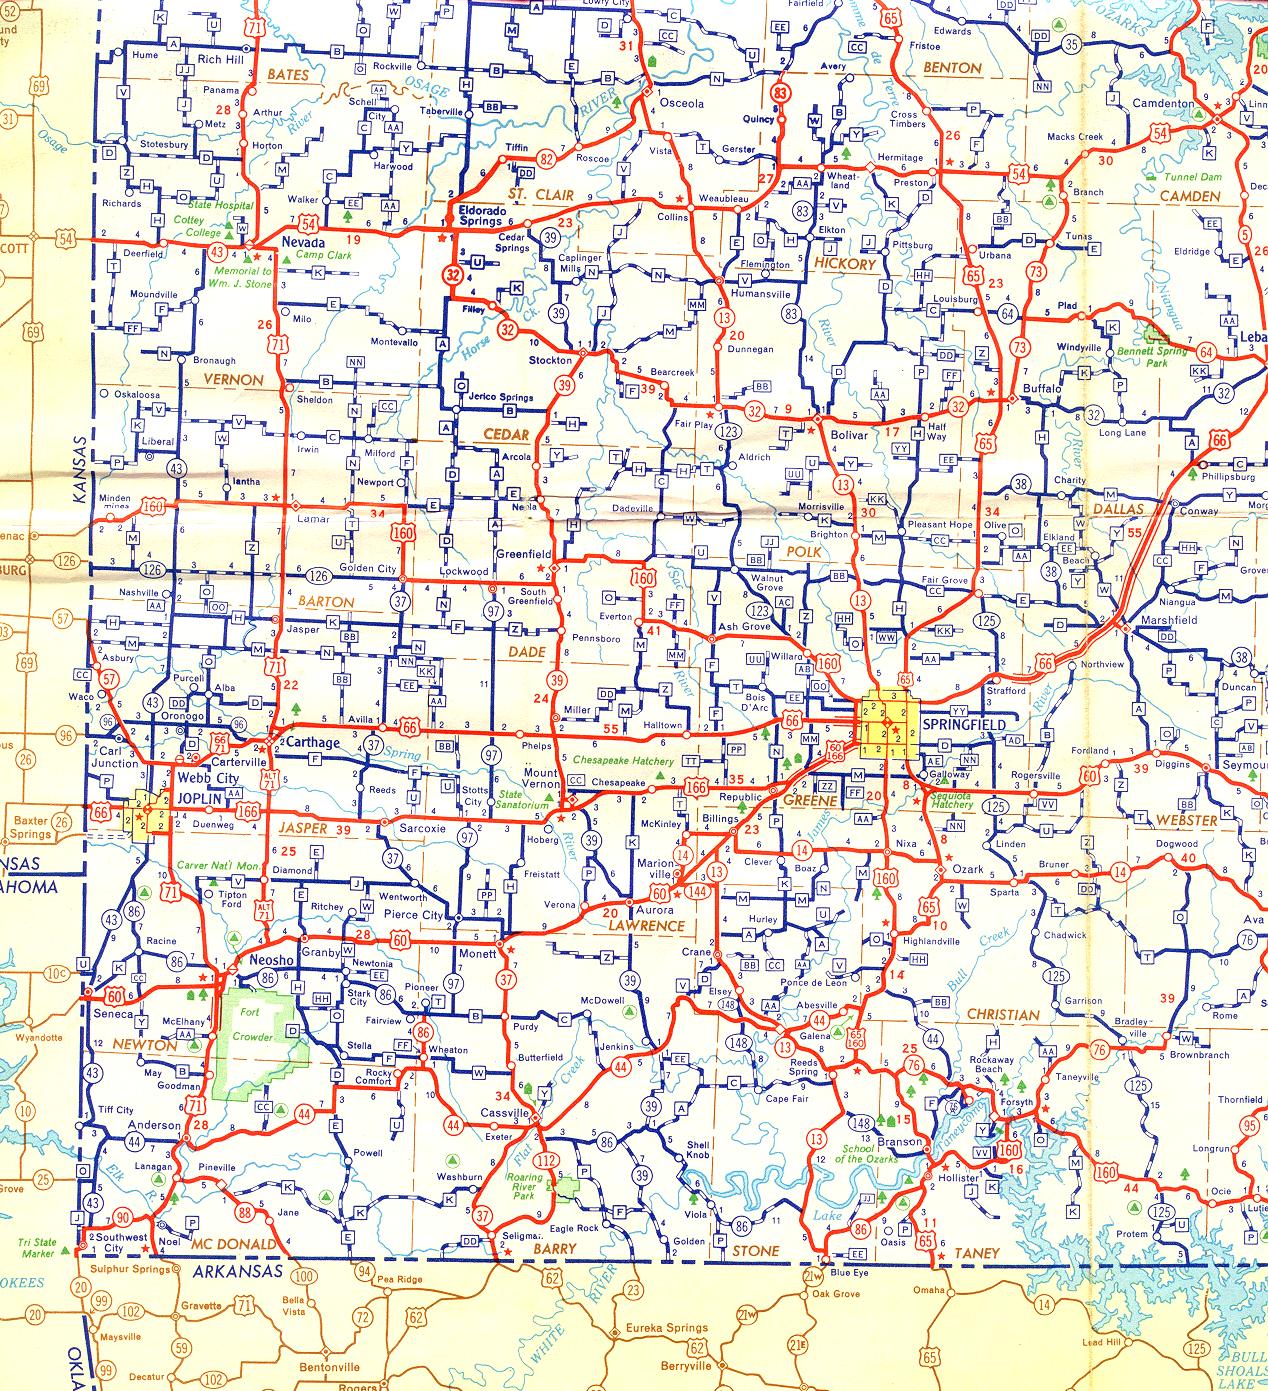 Section of 1956 official highway map for Missouri